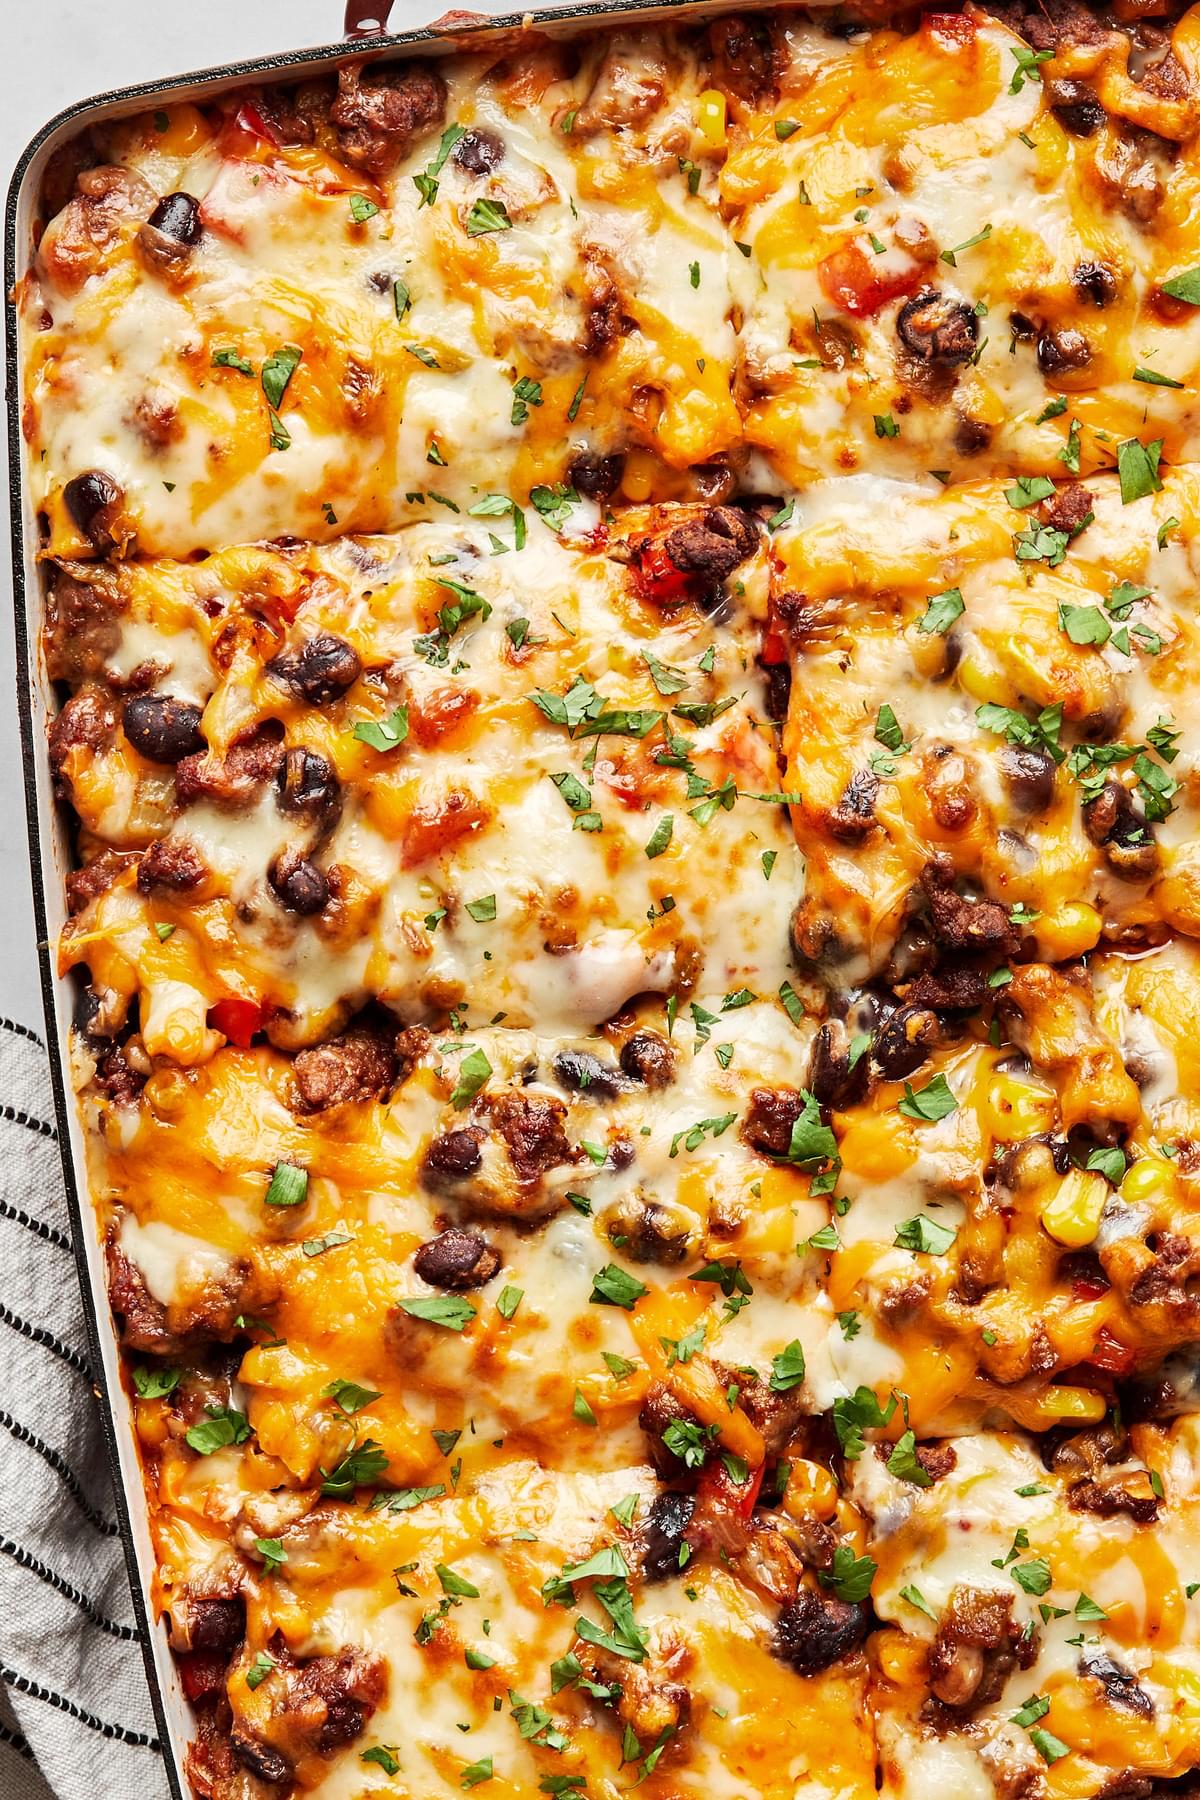 enchilada casserole in a baking dish made with ground beef, black beans, corn, peppers, onions, chiles and cheese